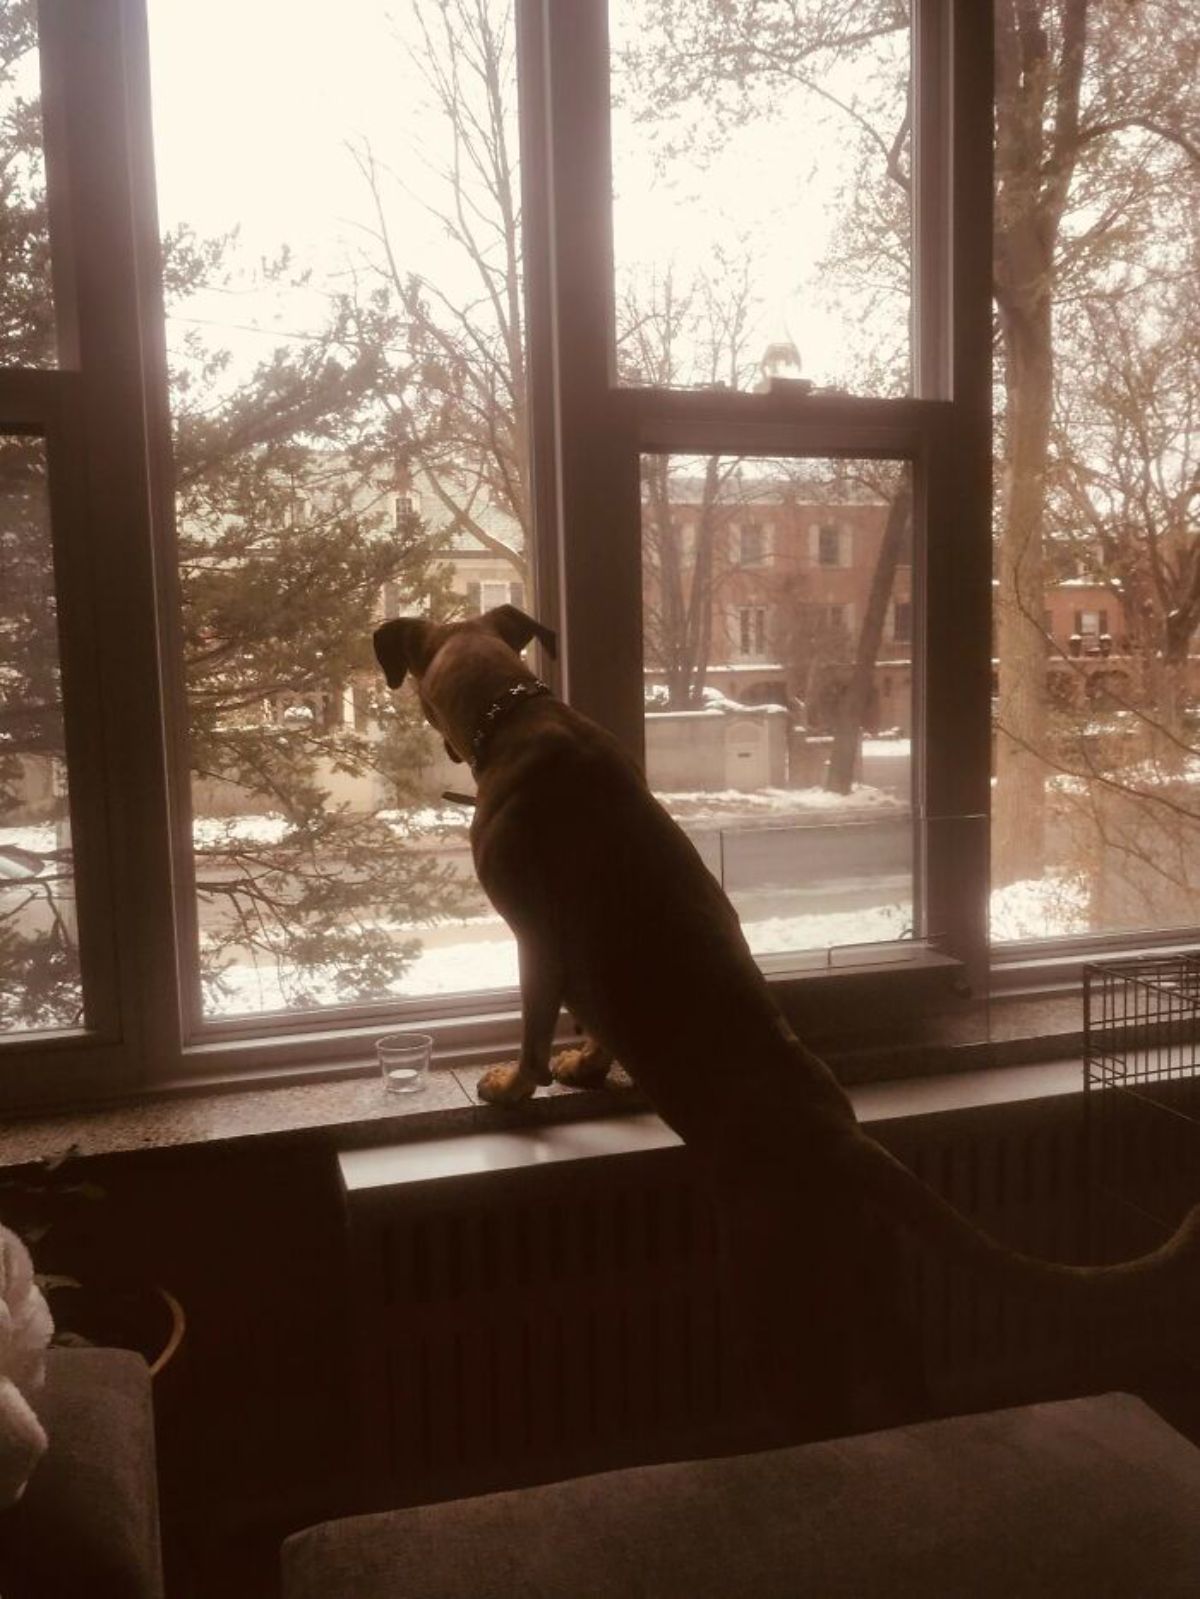 brown dog standing on hind legs with front paws on a window ledge and looking out the window